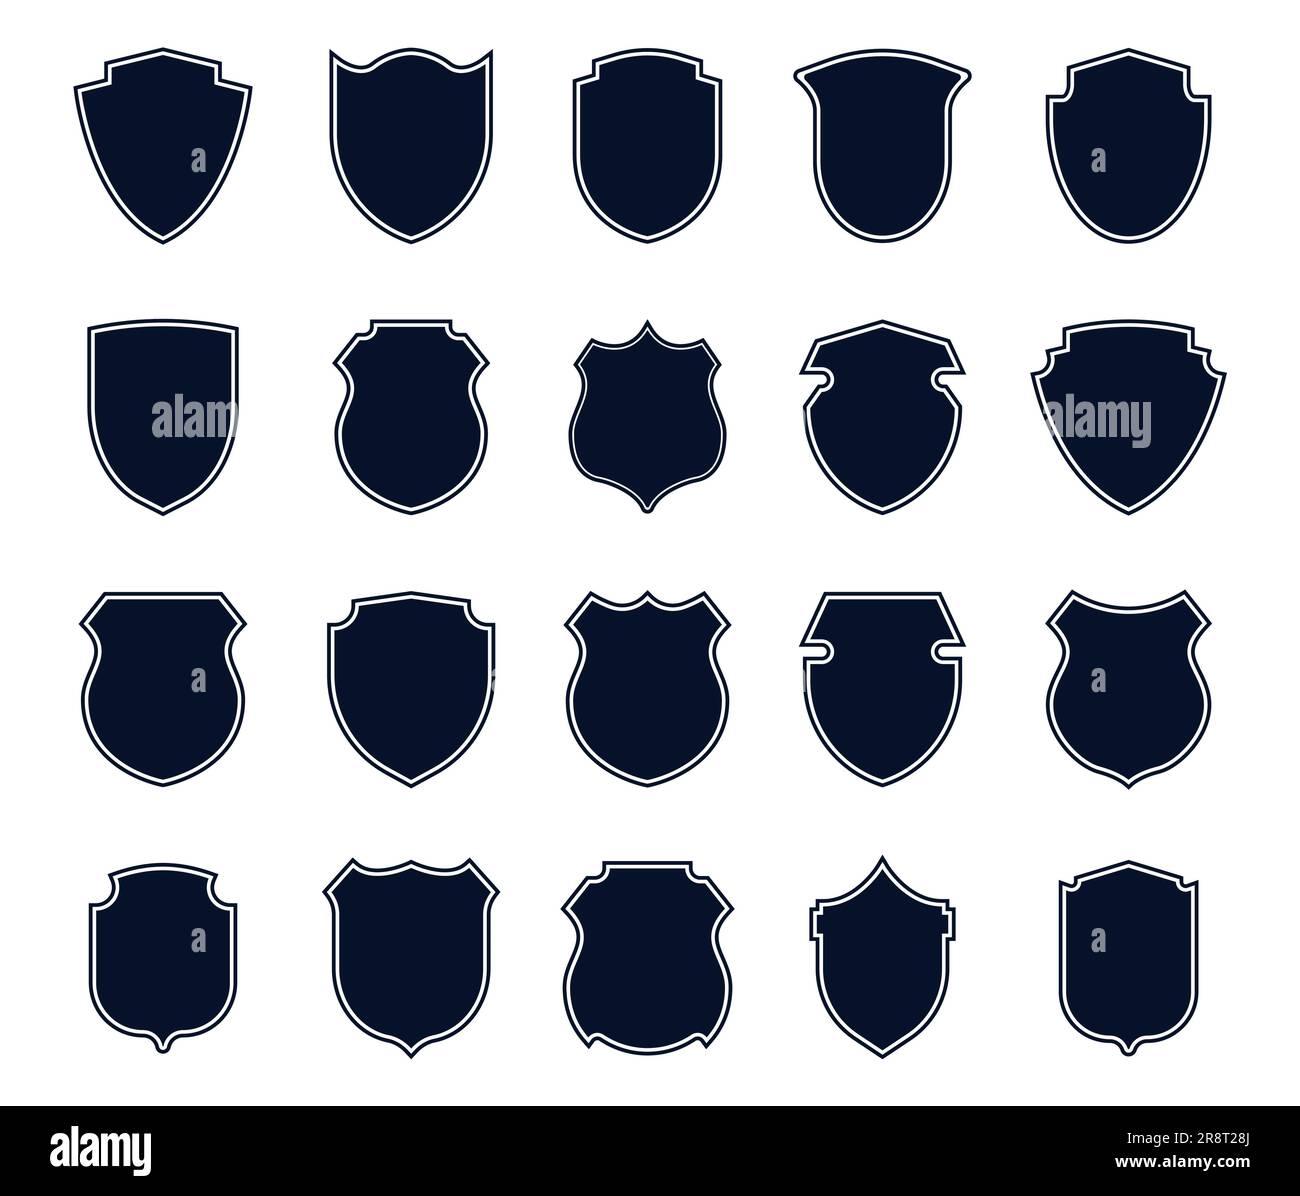 Police badges set Stock Vector